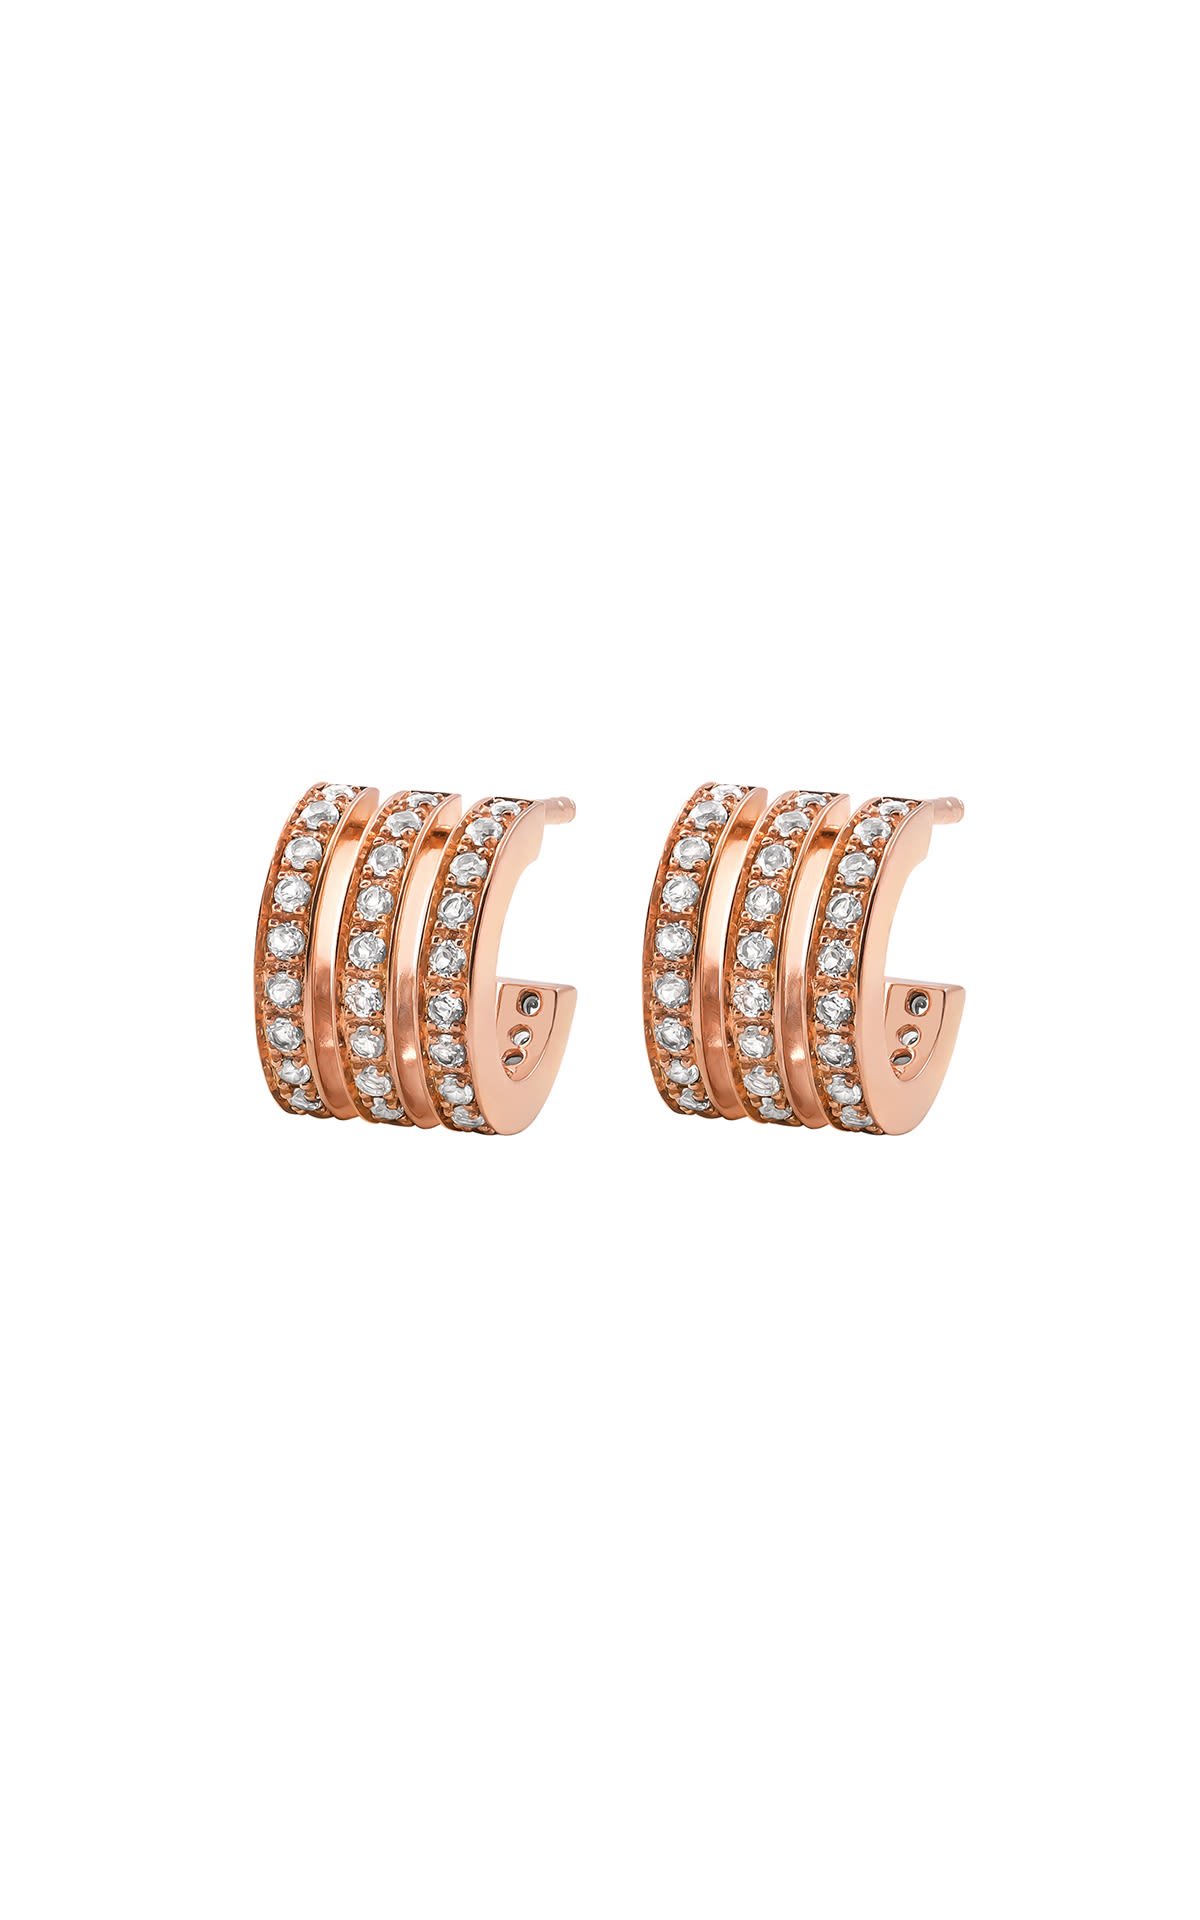 Rose gold earrings Aristocrazy